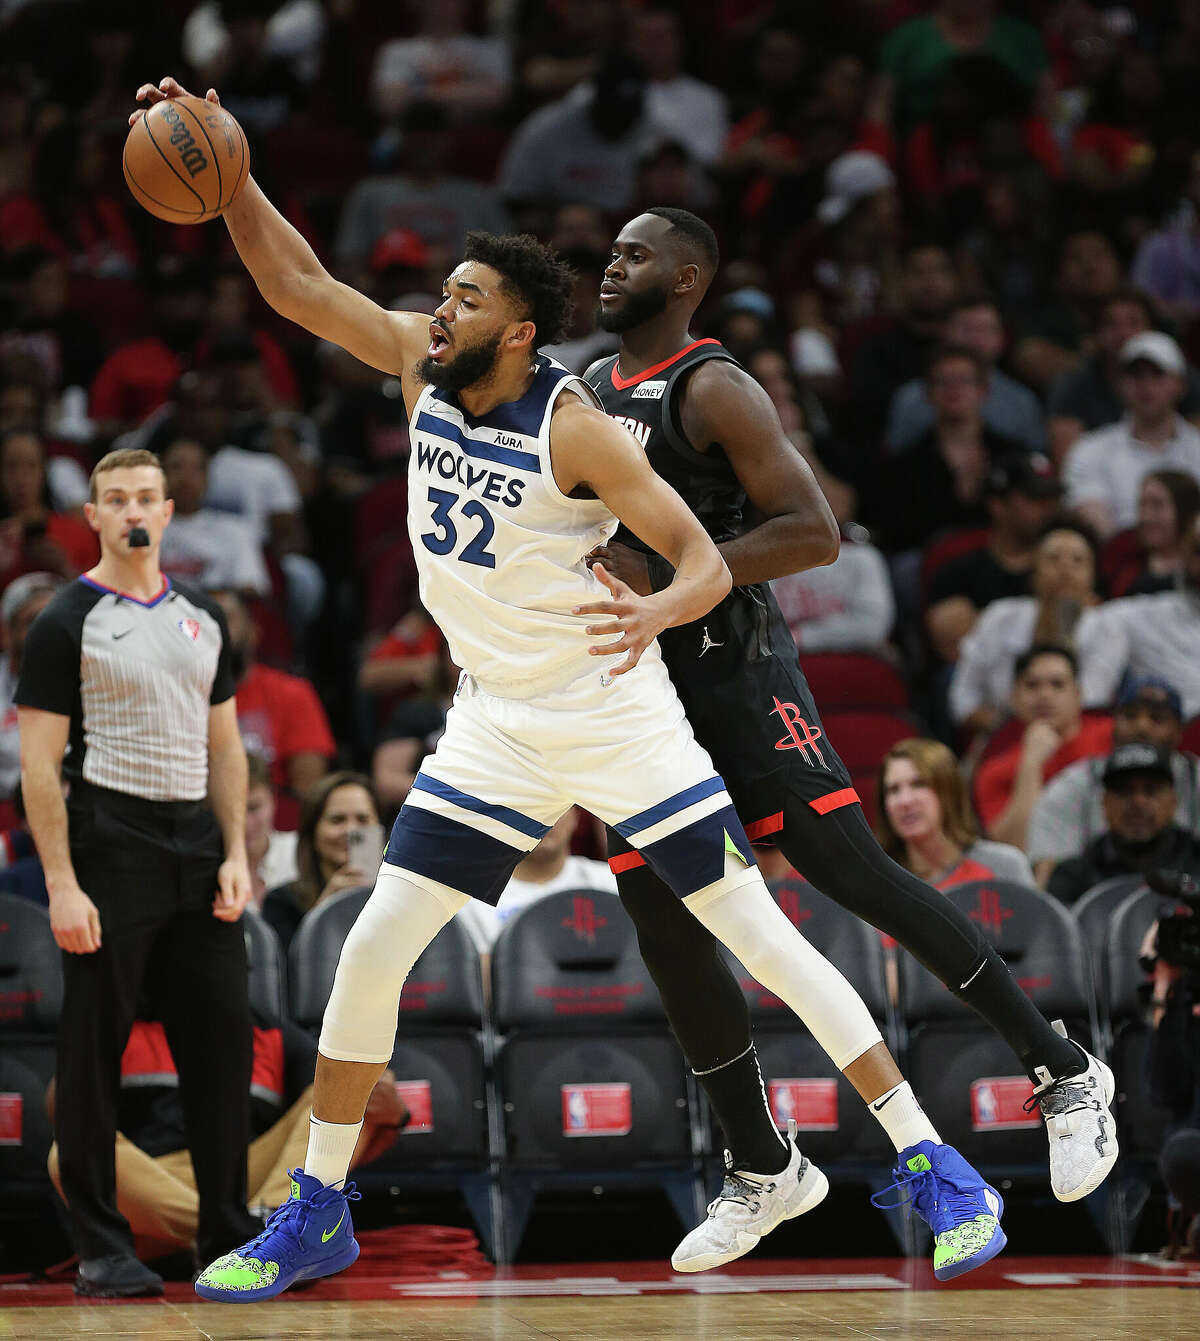 HOUSTON, TEXAS - APRIL 03: Karl-Anthony Towns #32 of the Minnesota Timberwolves received the ball as he is guarded by Usman Garuba #16 of the Houston Rockets during the second quarter at Toyota Center on April 03, 2022 in Houston, Texas. NOTE TO USER: User expressly acknowledges and agrees that, by downloading and or using this photograph, User is consenting to the terms and conditions of the Getty Images License Agreement. (Photo by Bob Levey/Getty Images)